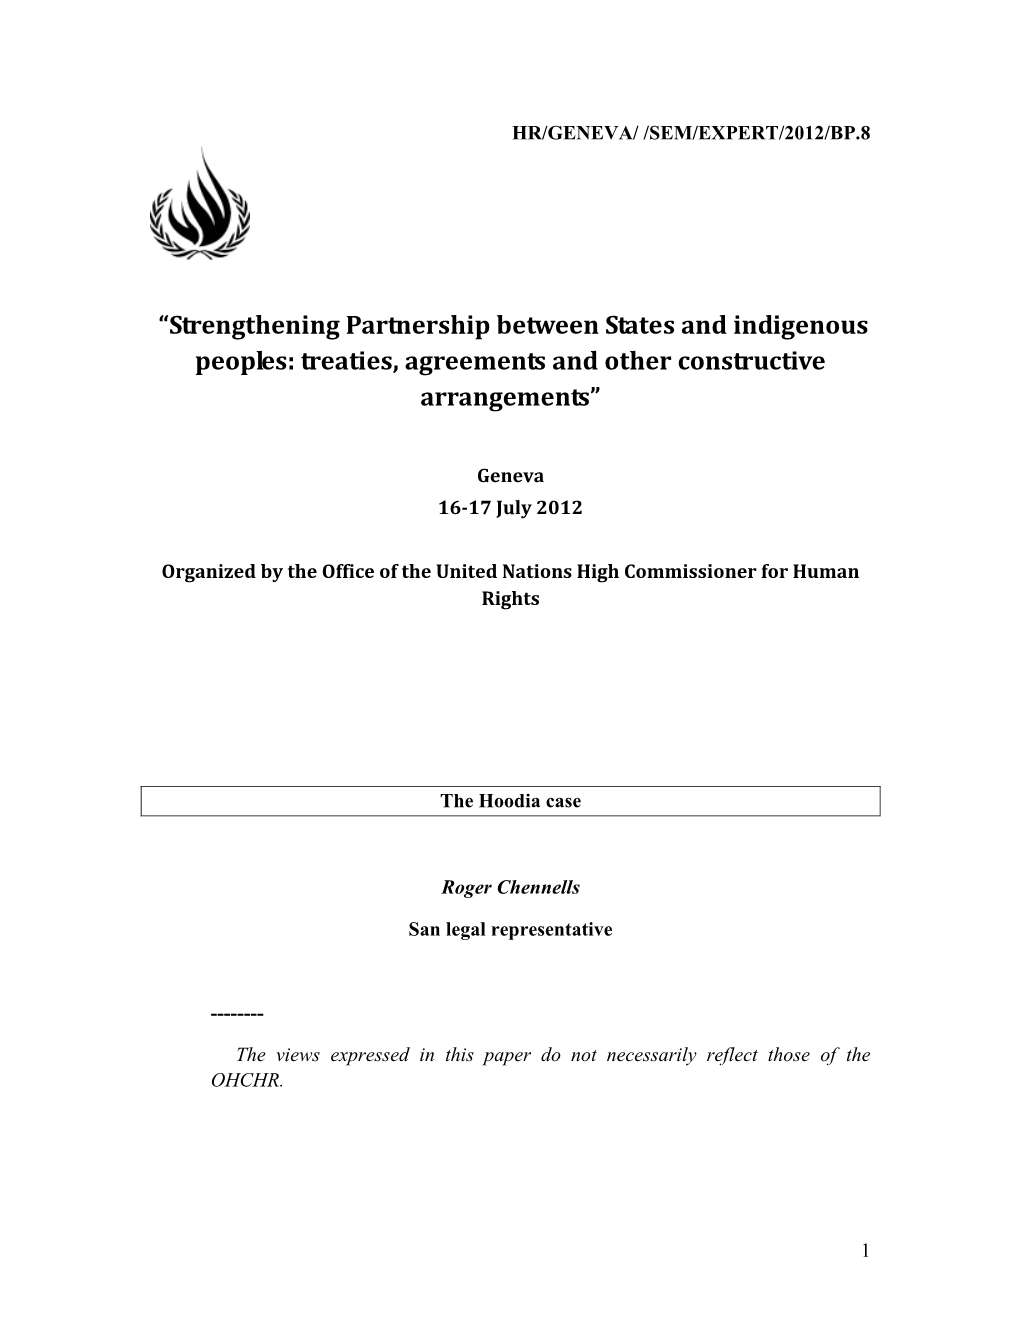 “Strengthening Partnership Between States and Indigenous Peoples: Treaties, Agreements and Other Constructive Arrangements”